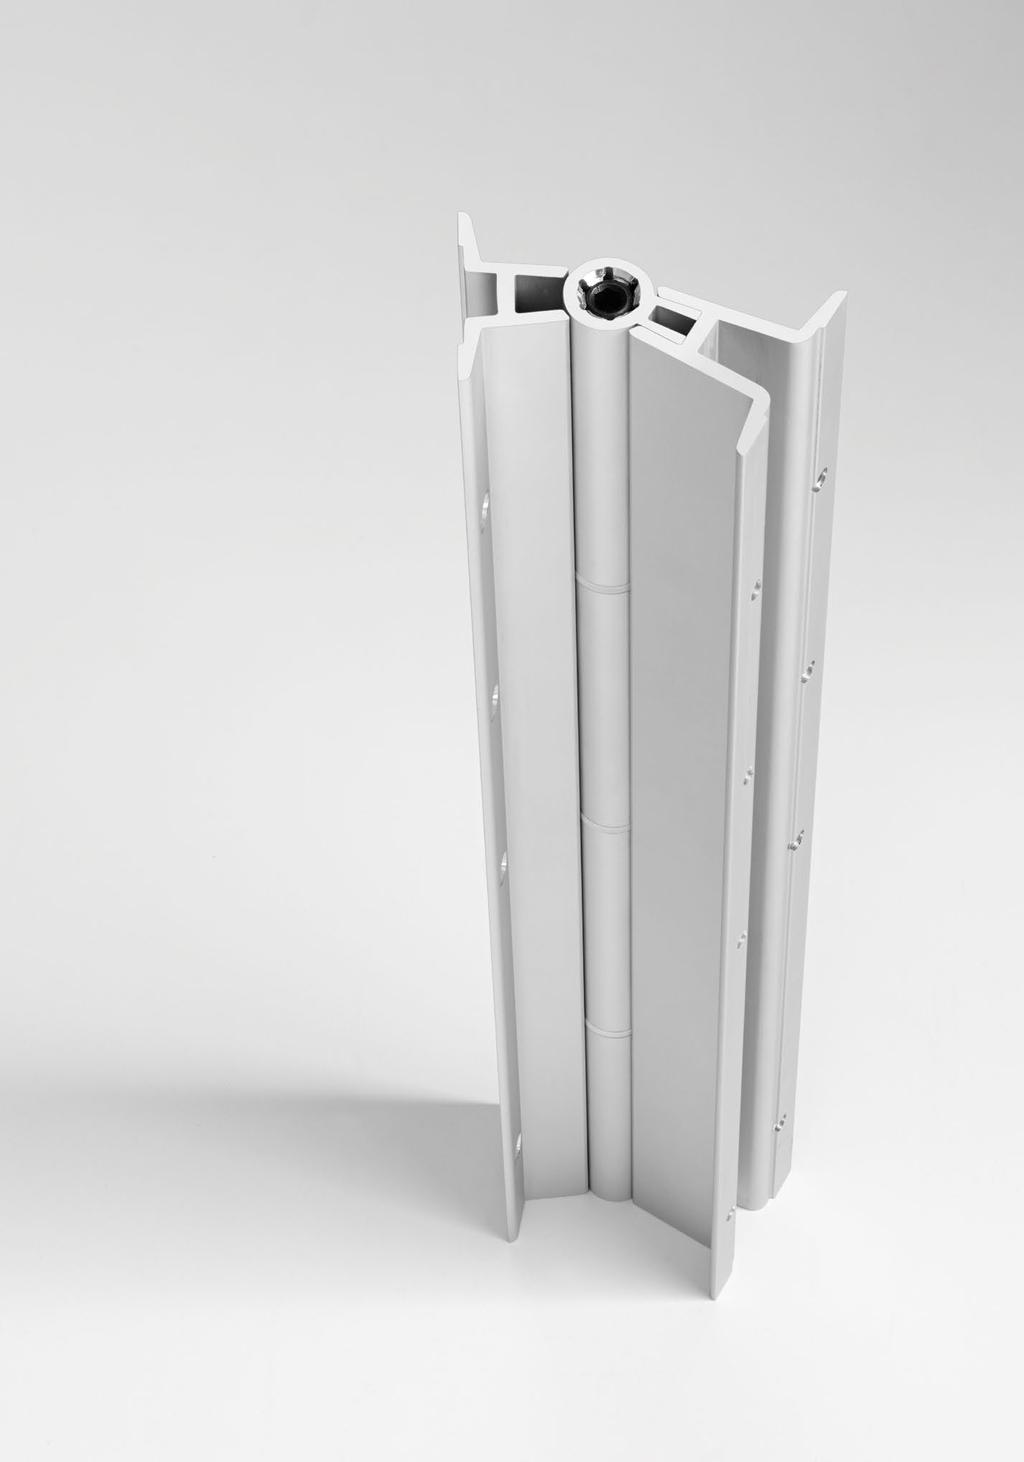 Hinges & Pivots Double Swing Hinge The Double Swing Hinge with Emergency Release Stop enables users to quickly open a